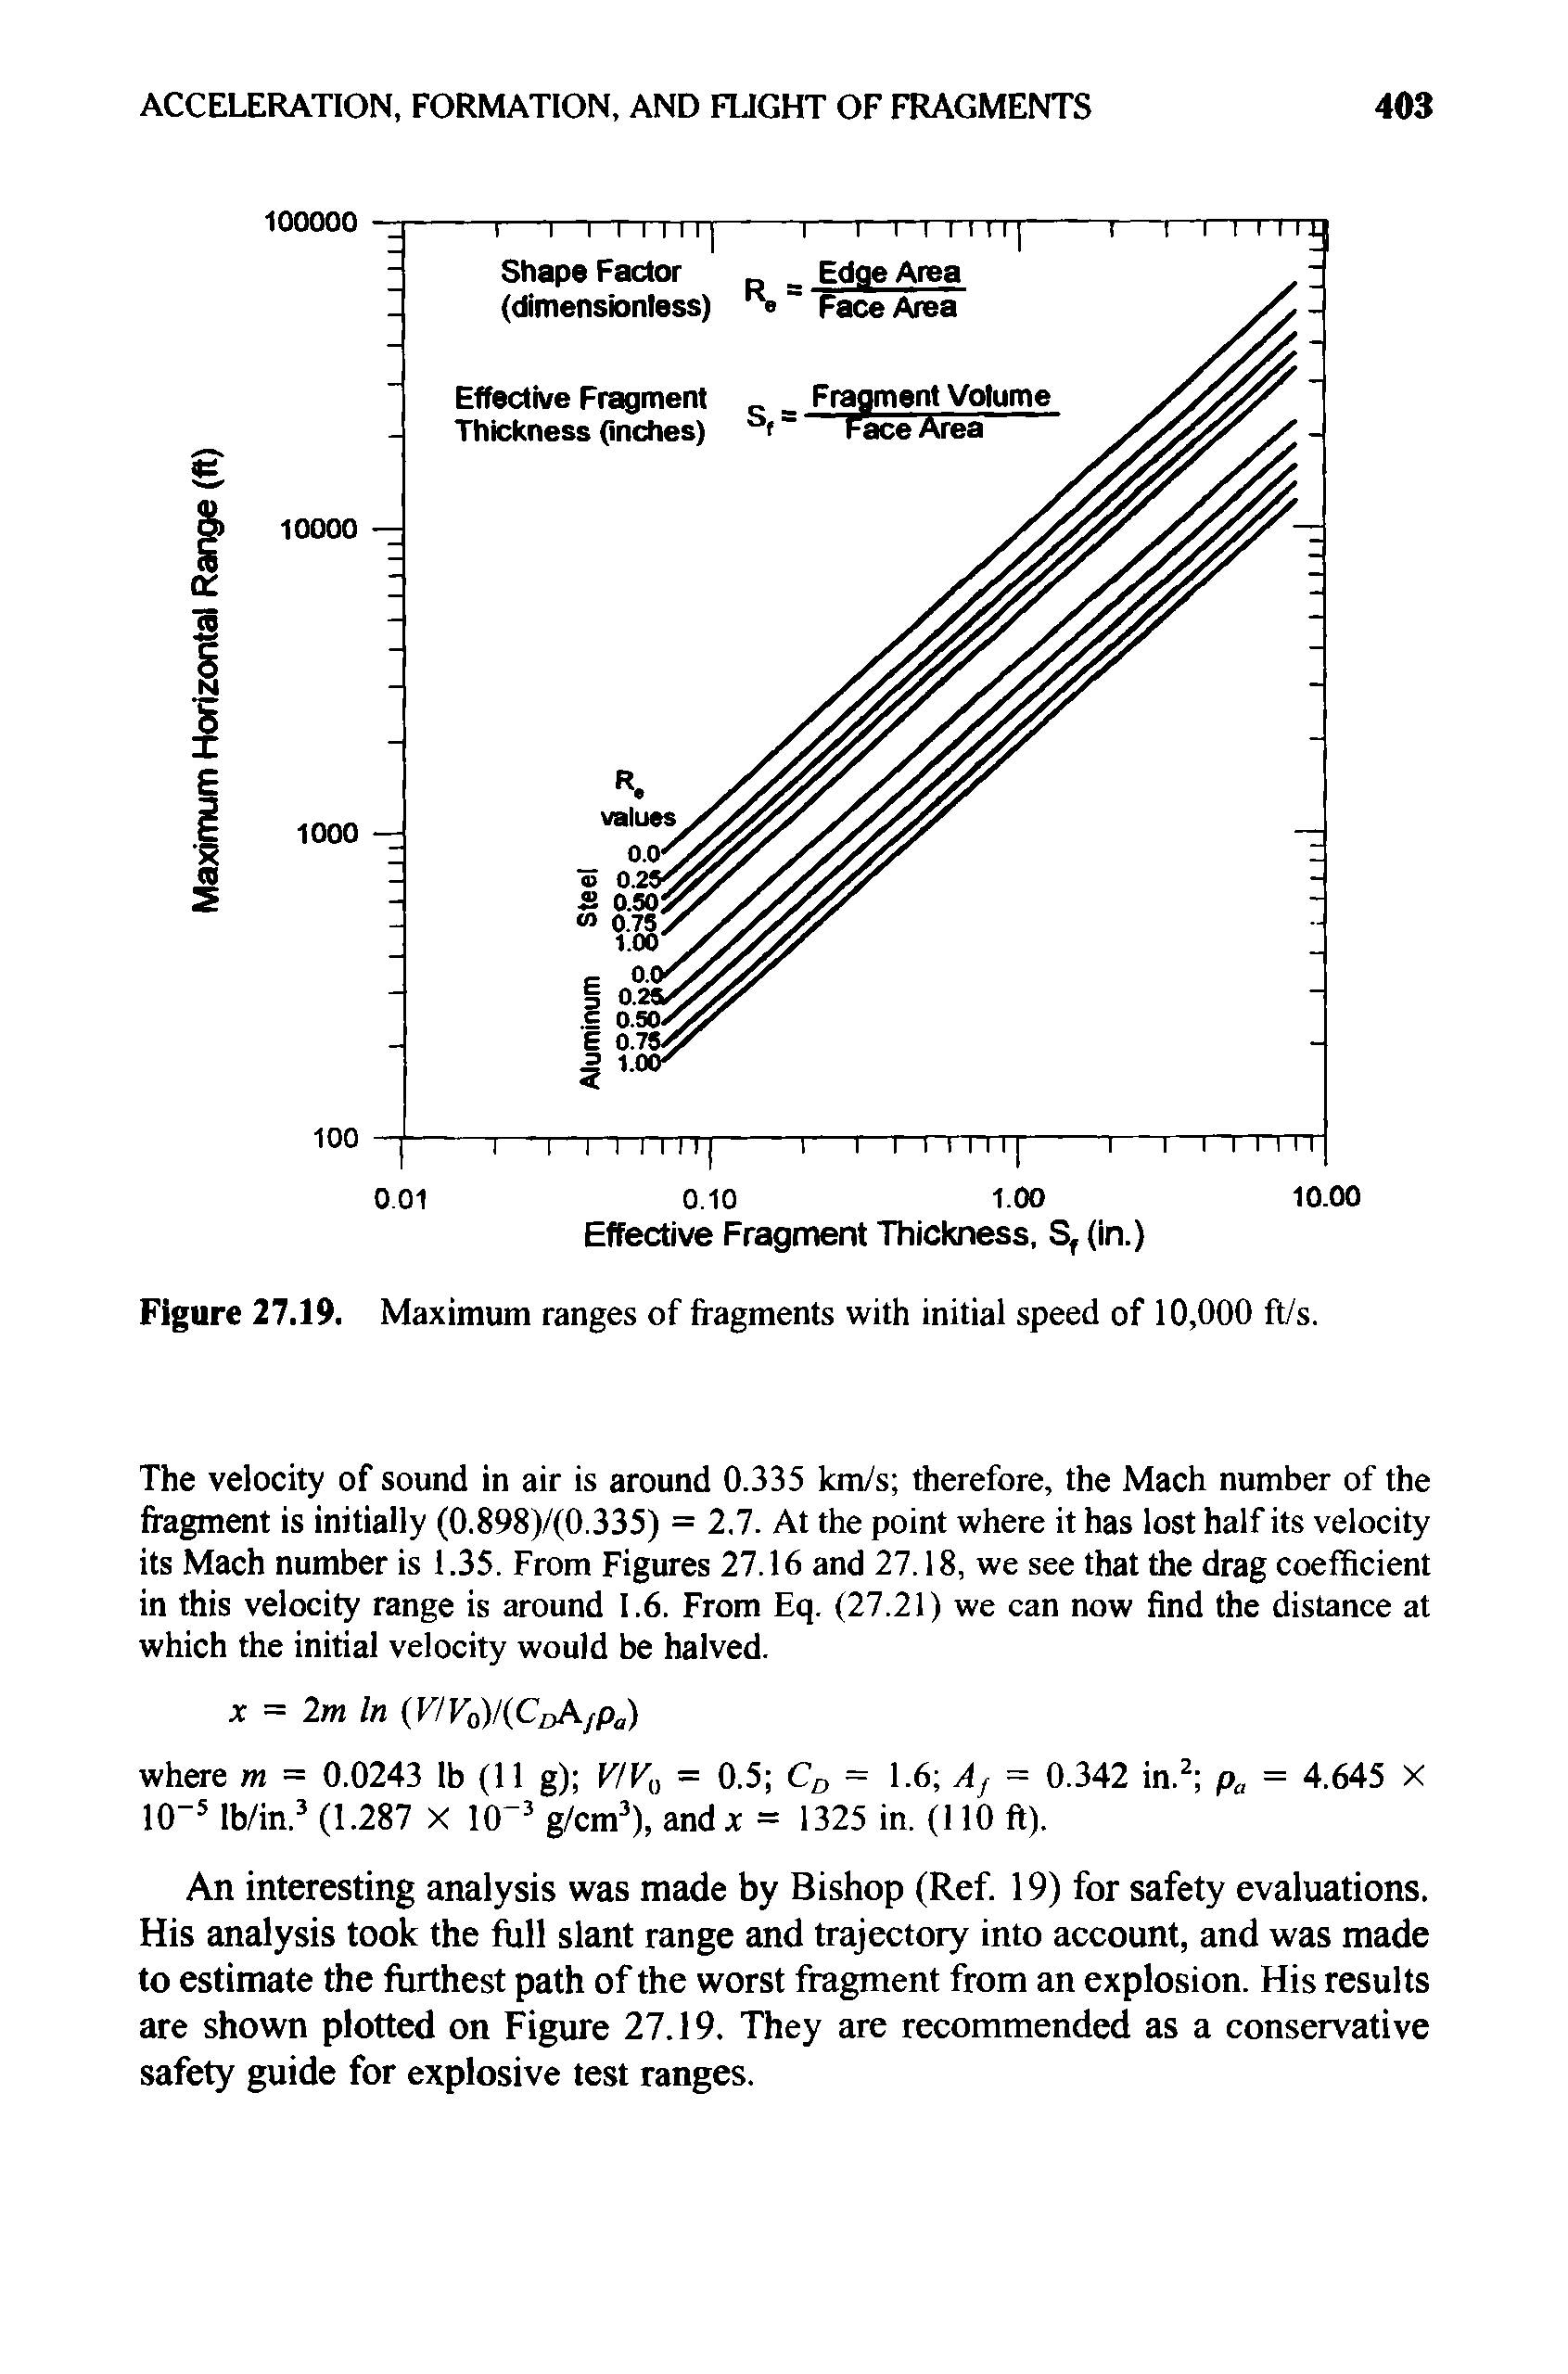 Figure 27.19. Maximum ranges of fragments with initial speed of 10,000 ft/s.